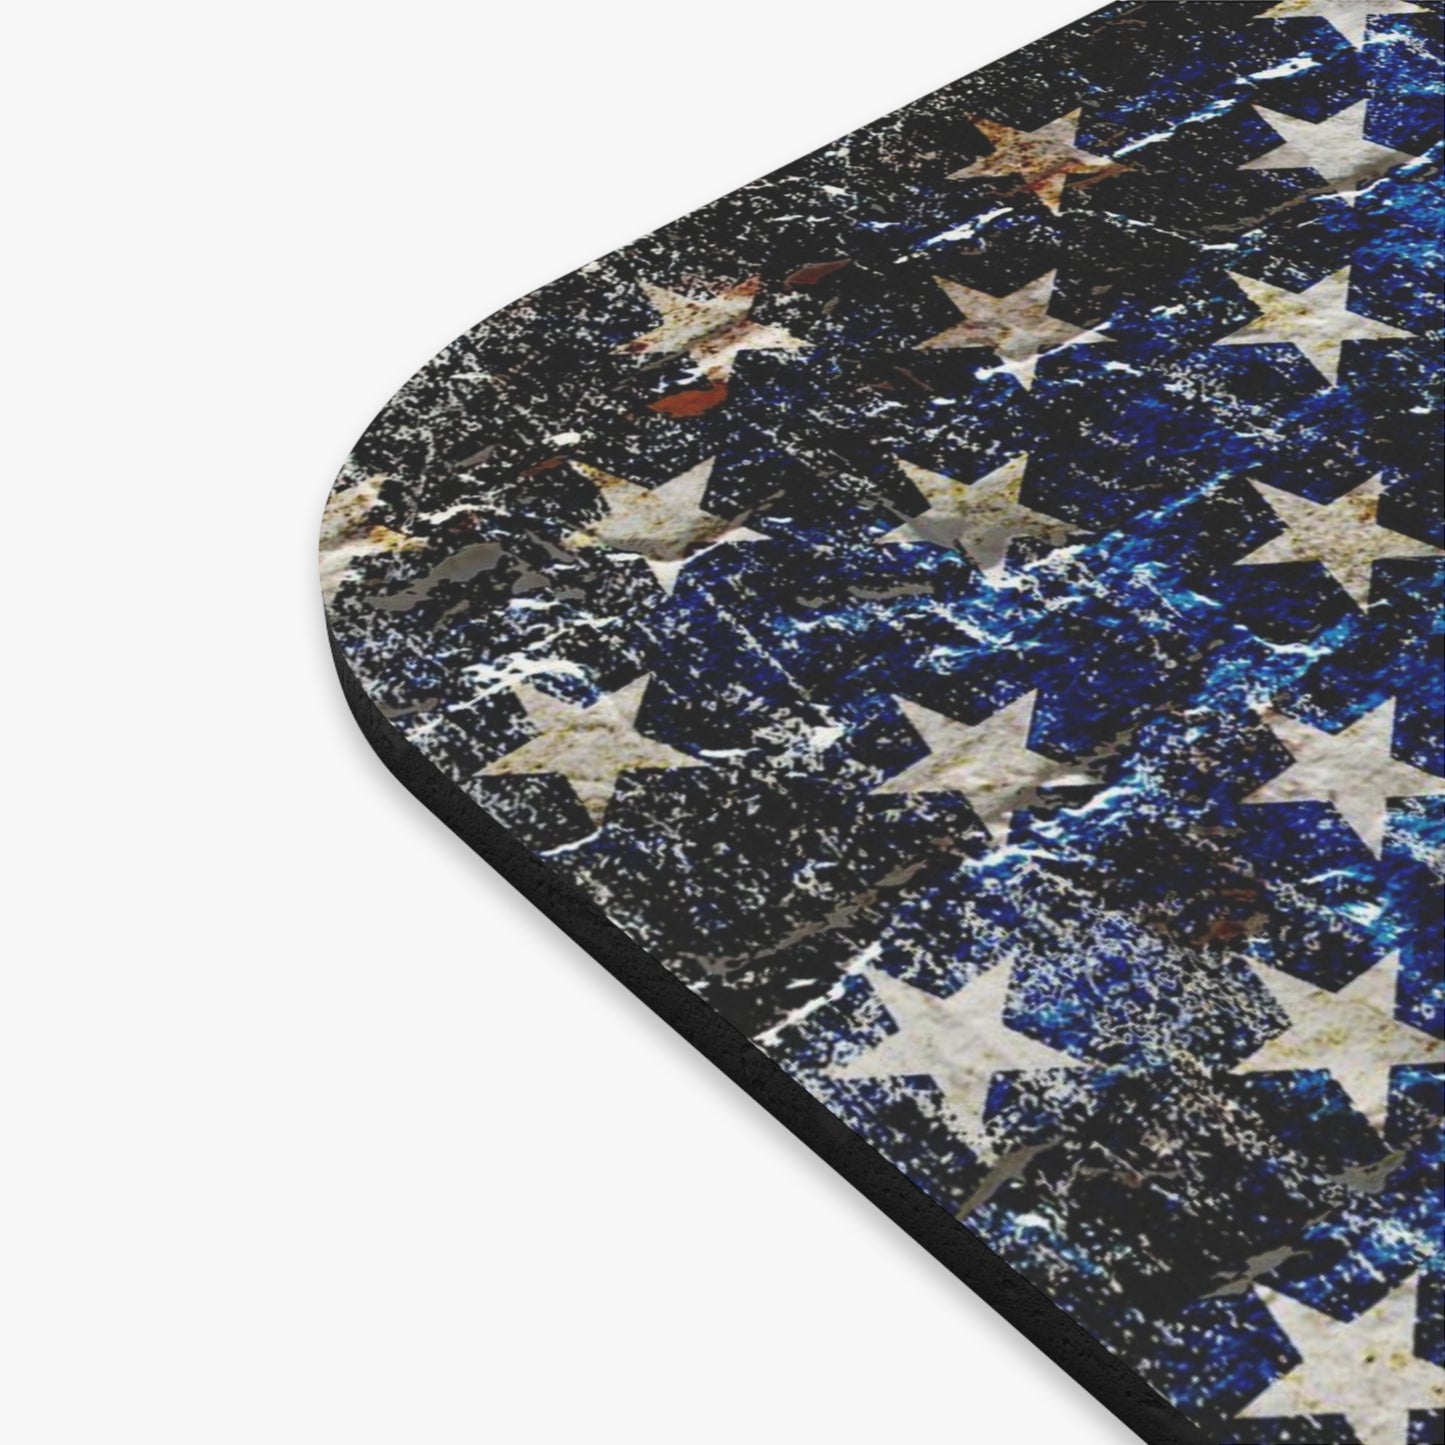 American Flag Themed Office Decor - American Flag on brick wall Print Mouse Pad